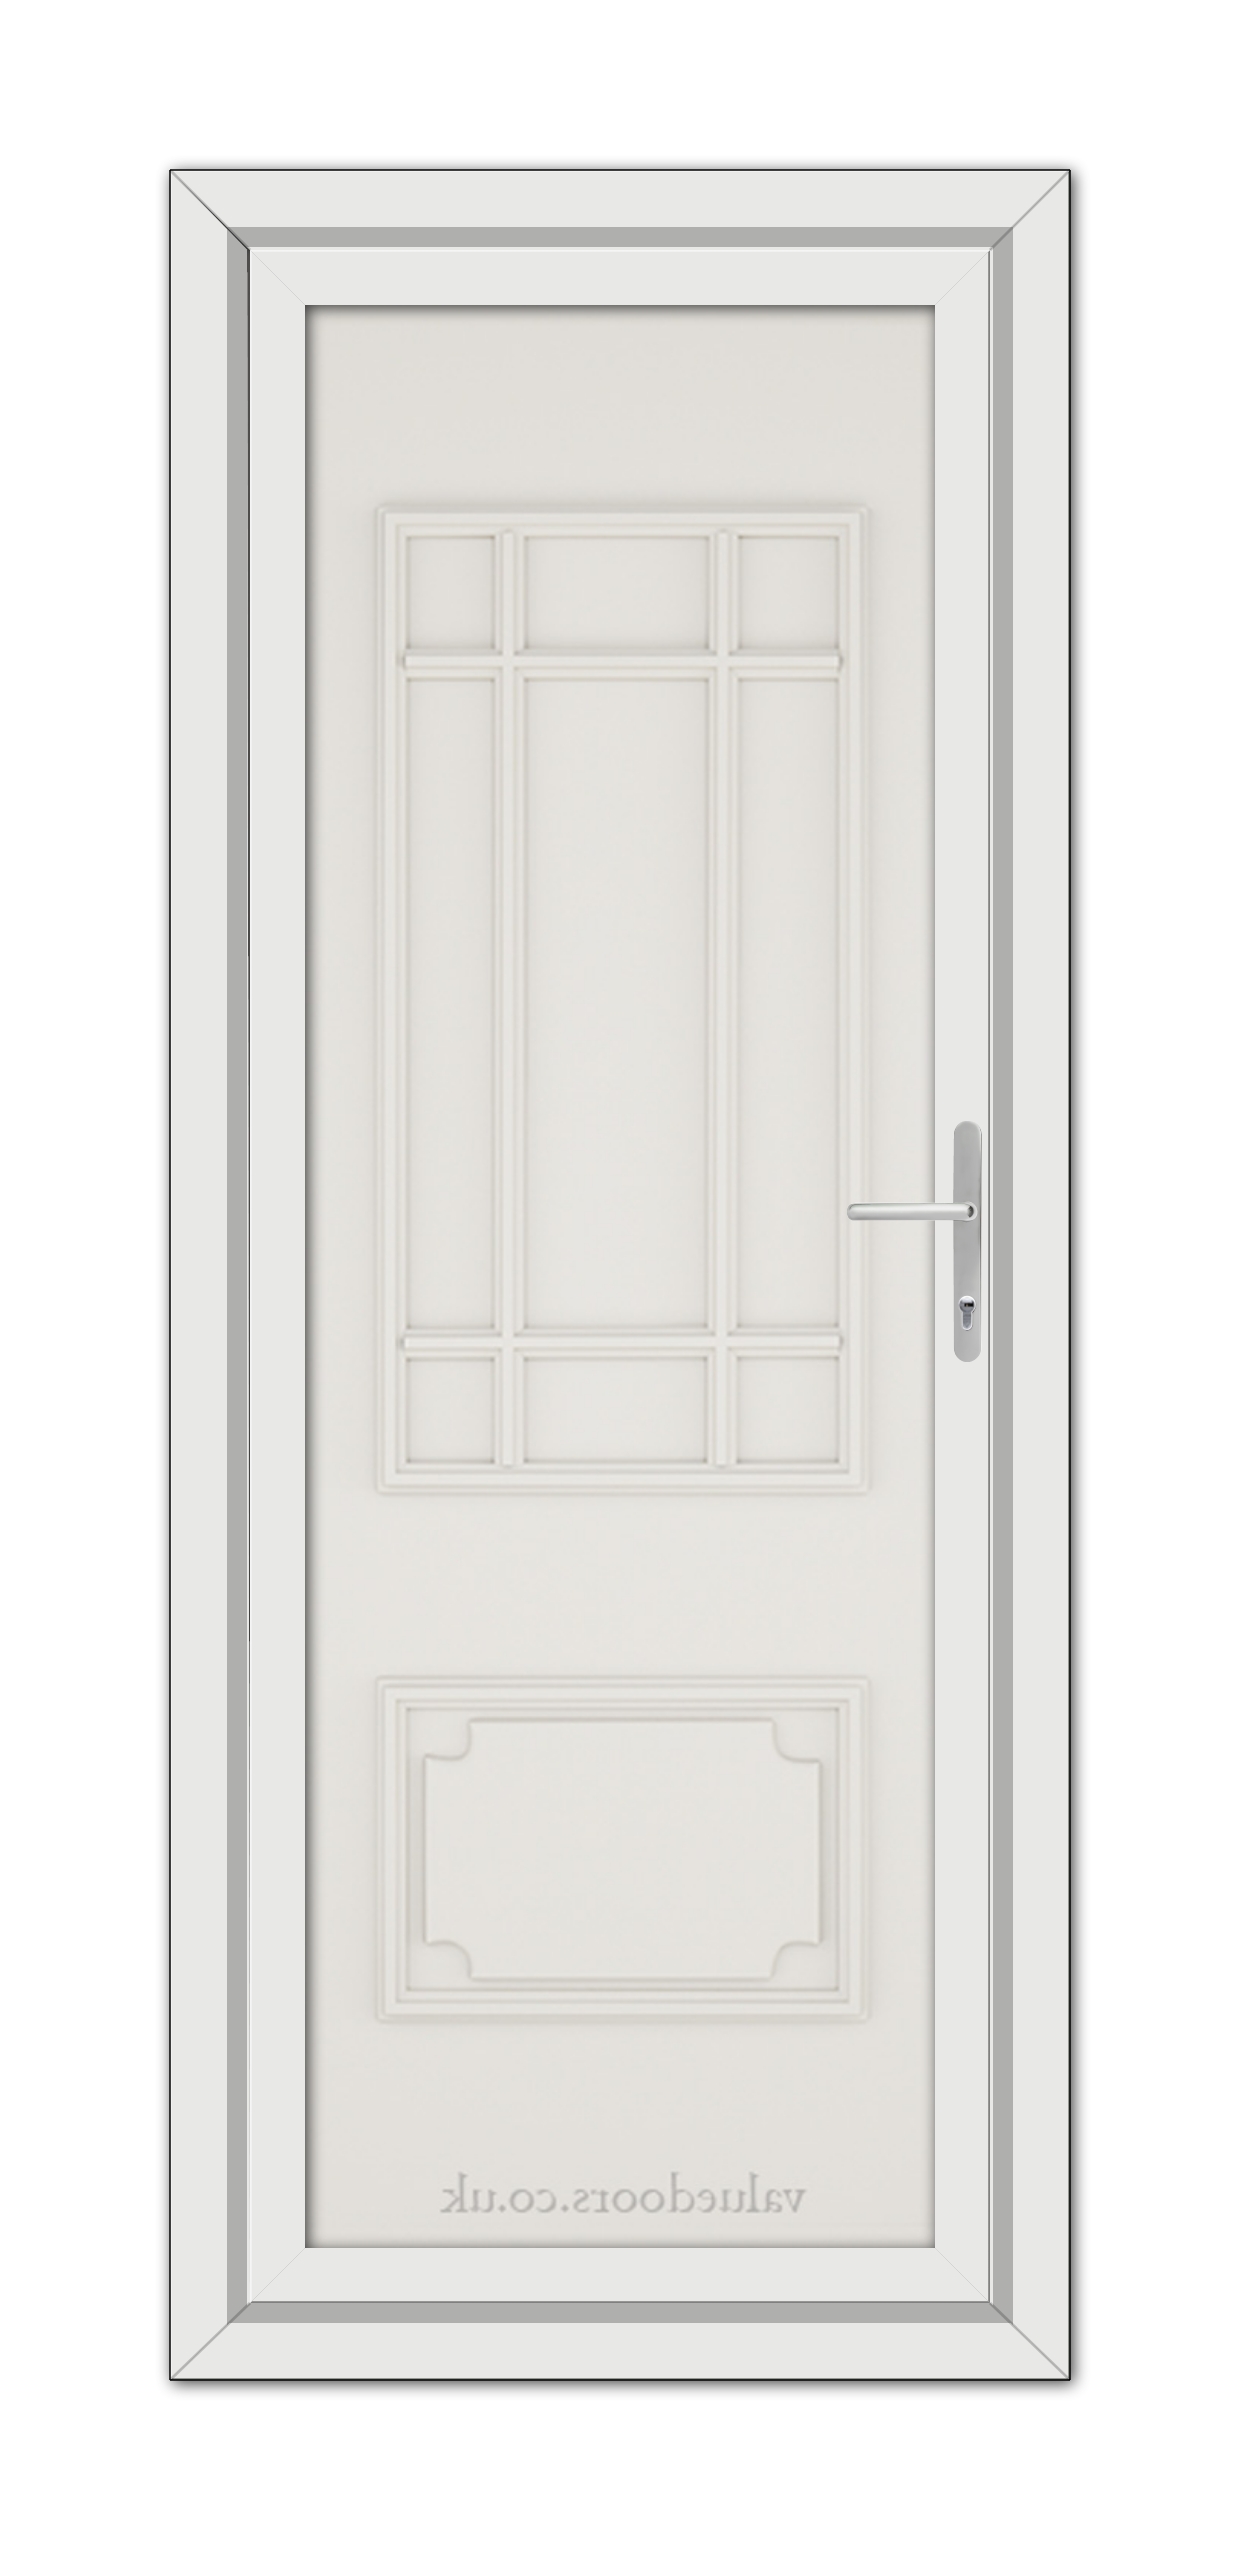 A White Cream Seville Solid uPVC Door with a vertical handle and decorative glass panels at the top, set in a simple frame.